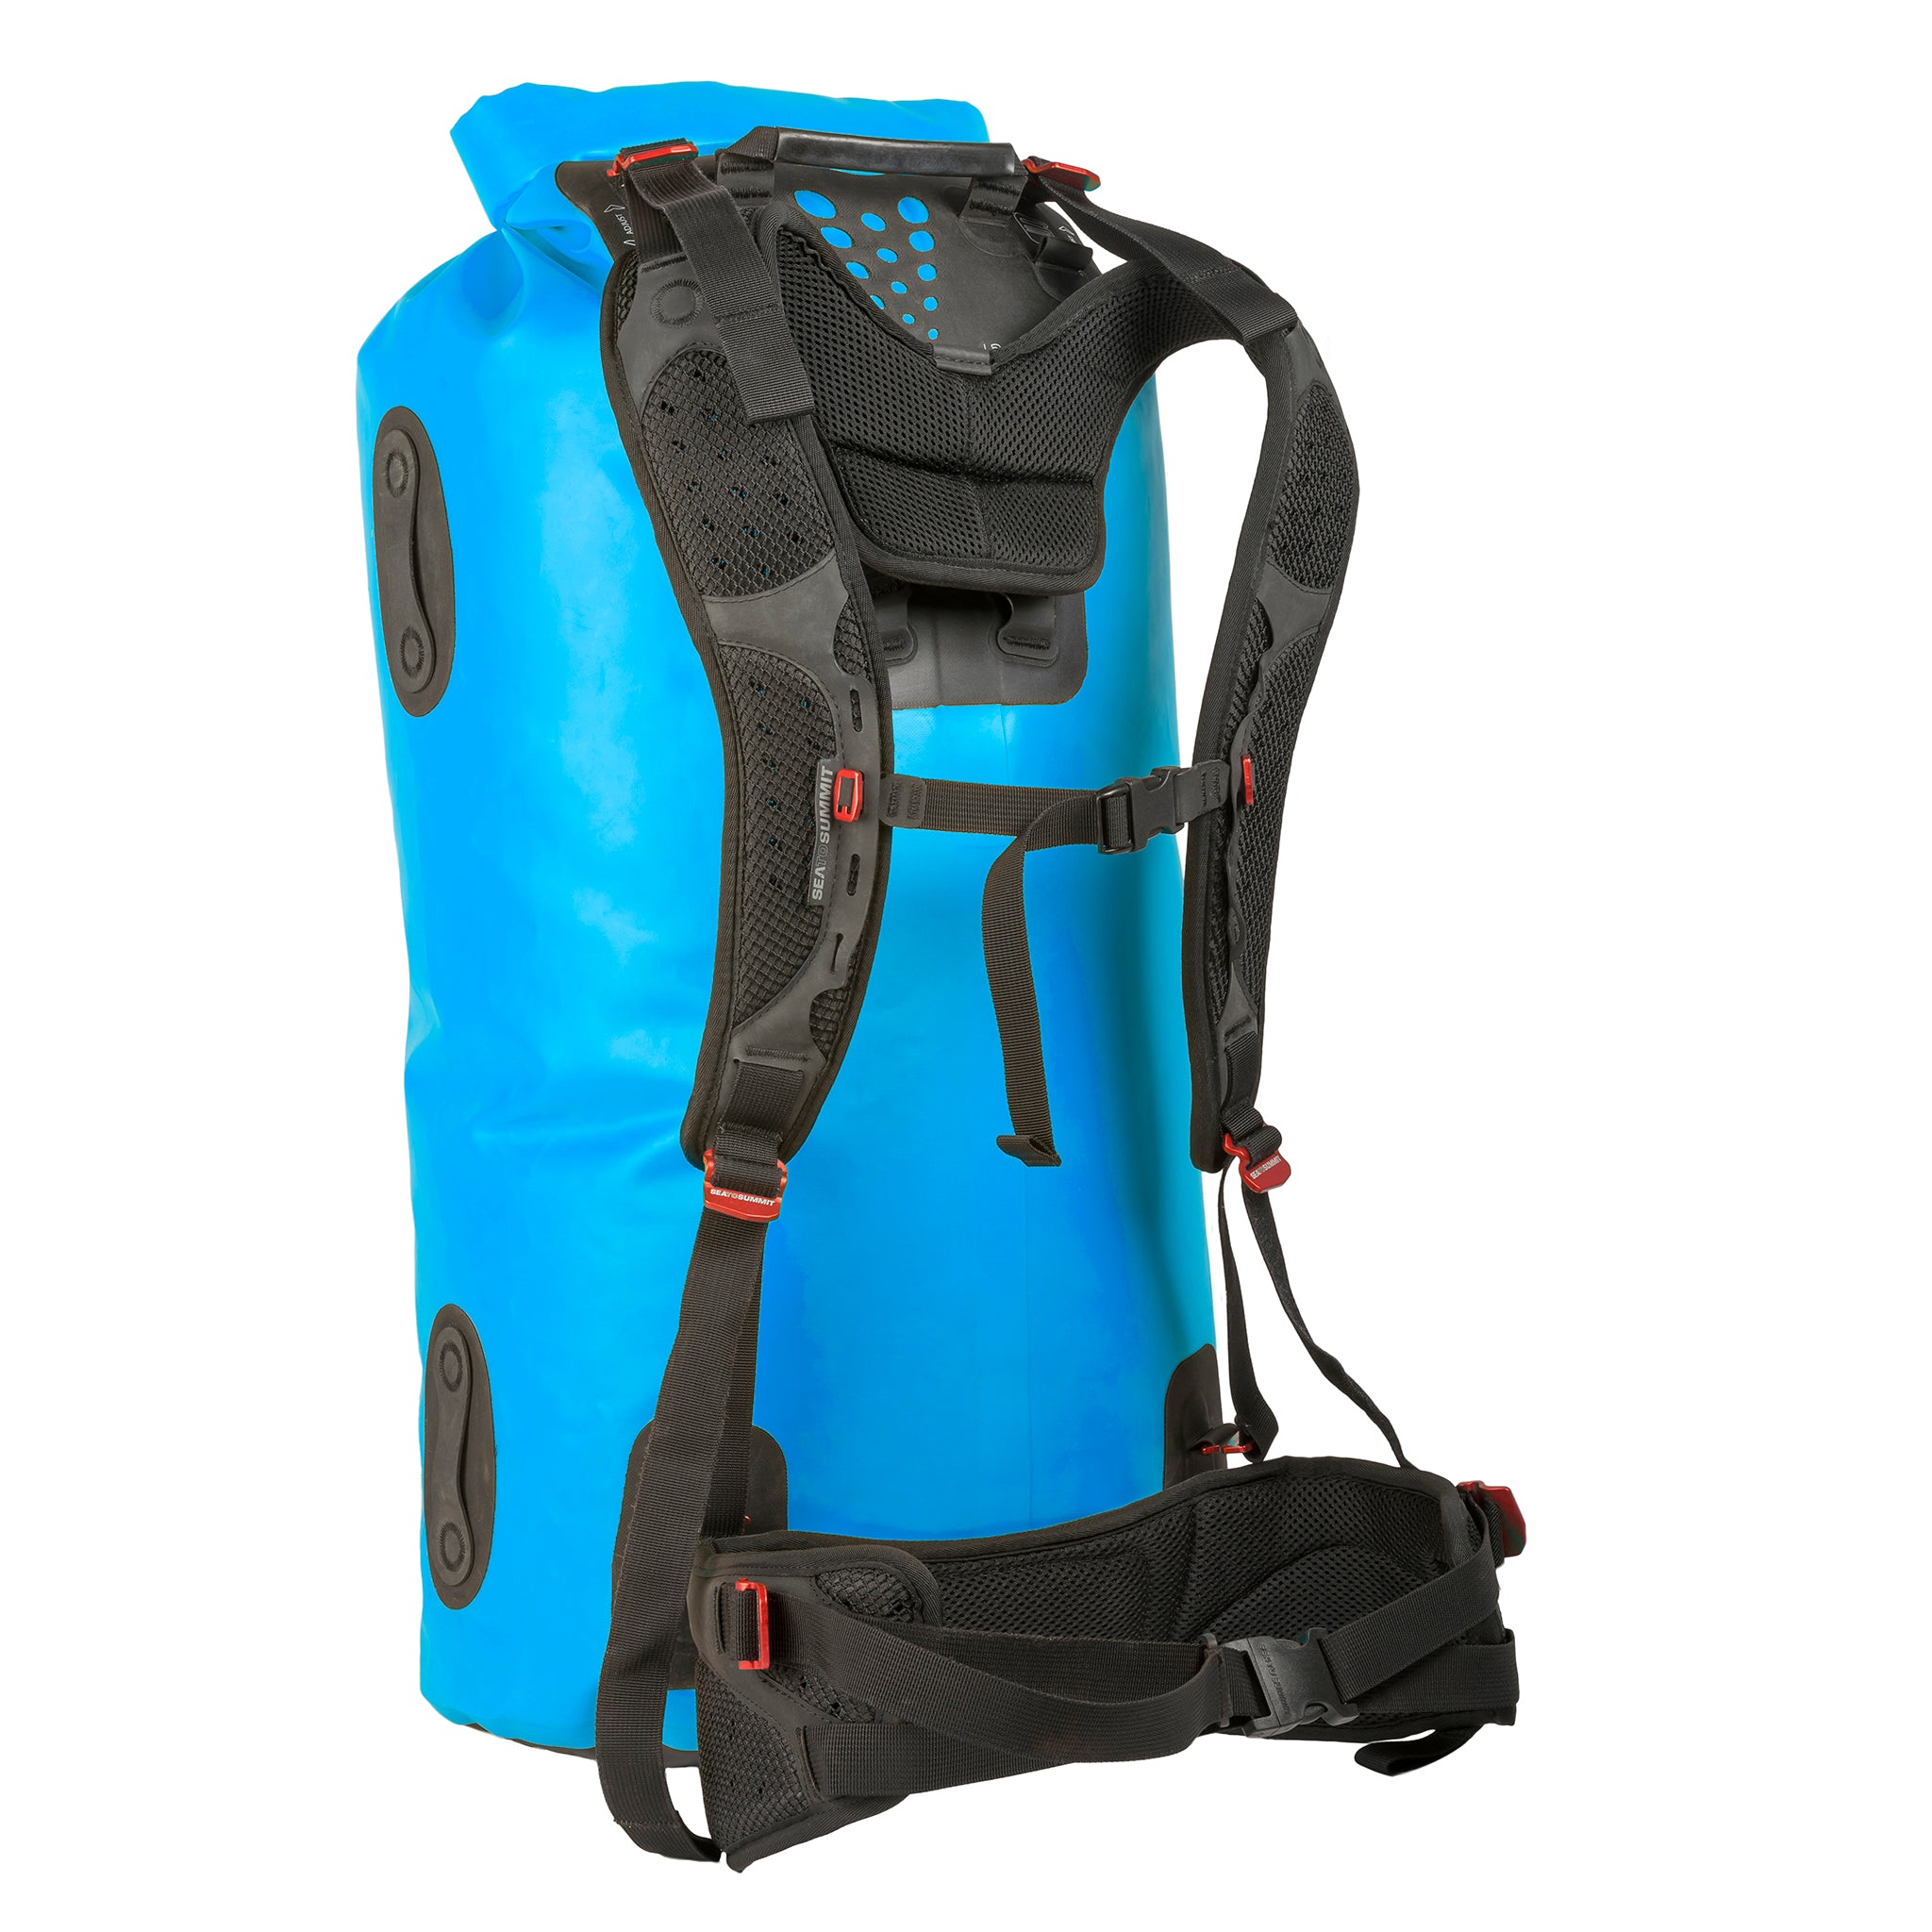 Hydraulic Dry Pack with Harness by Sea to Summit